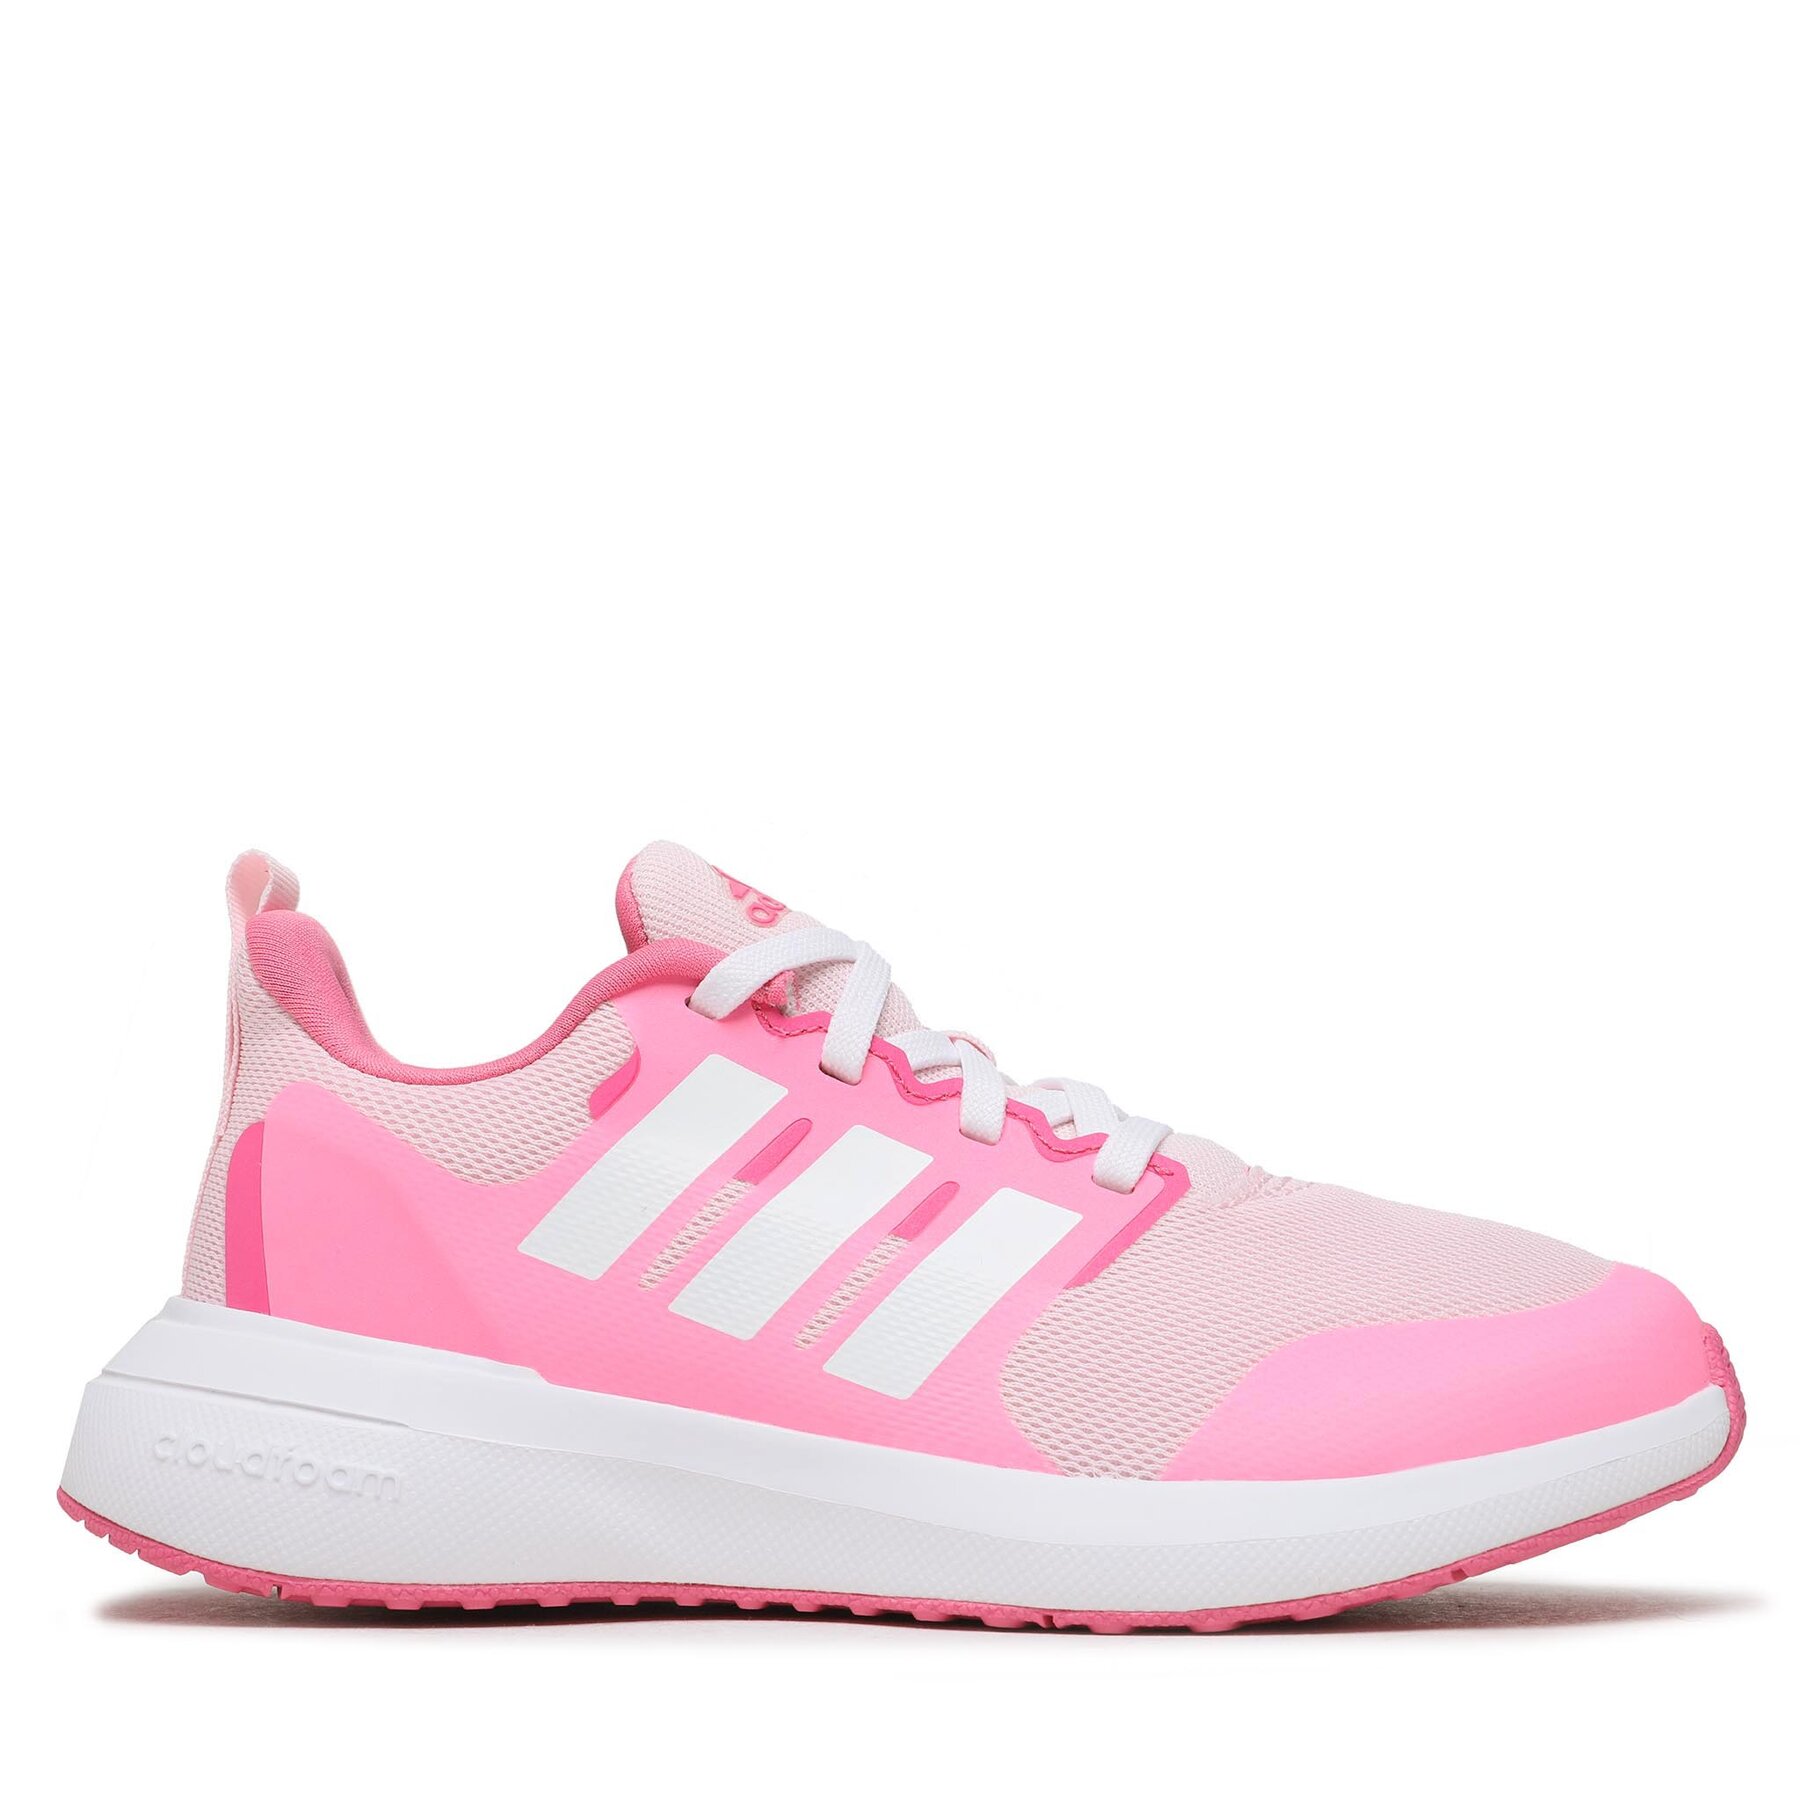 Sneakers adidas FortaRun 2.0 Cloudfoam Lace Shoes ID2361 Rosa von Adidas